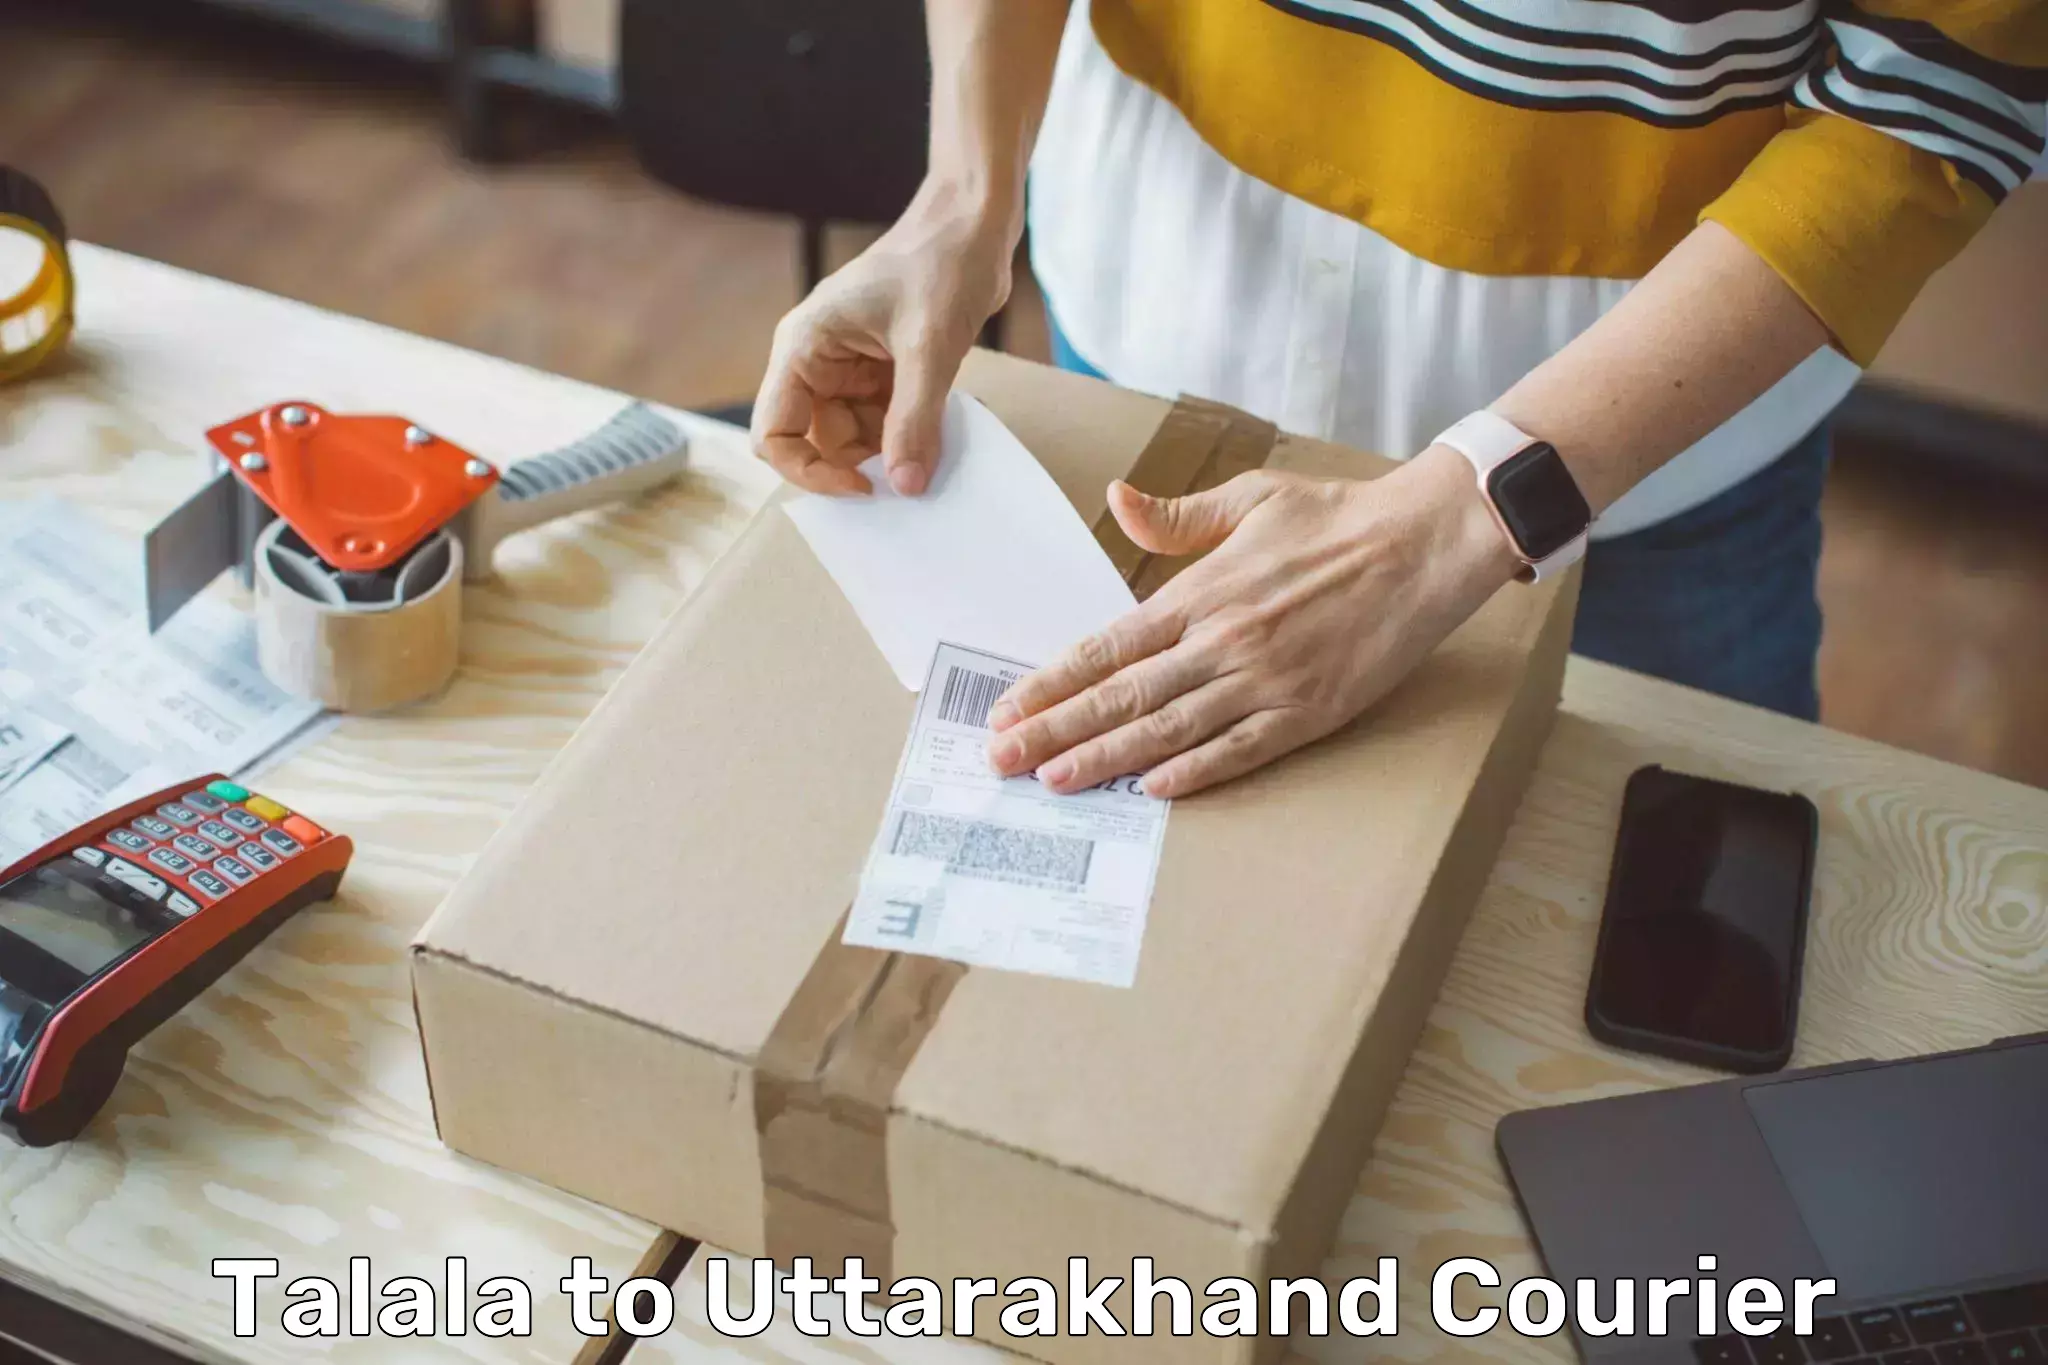 Courier tracking online Talala to Lansdowne